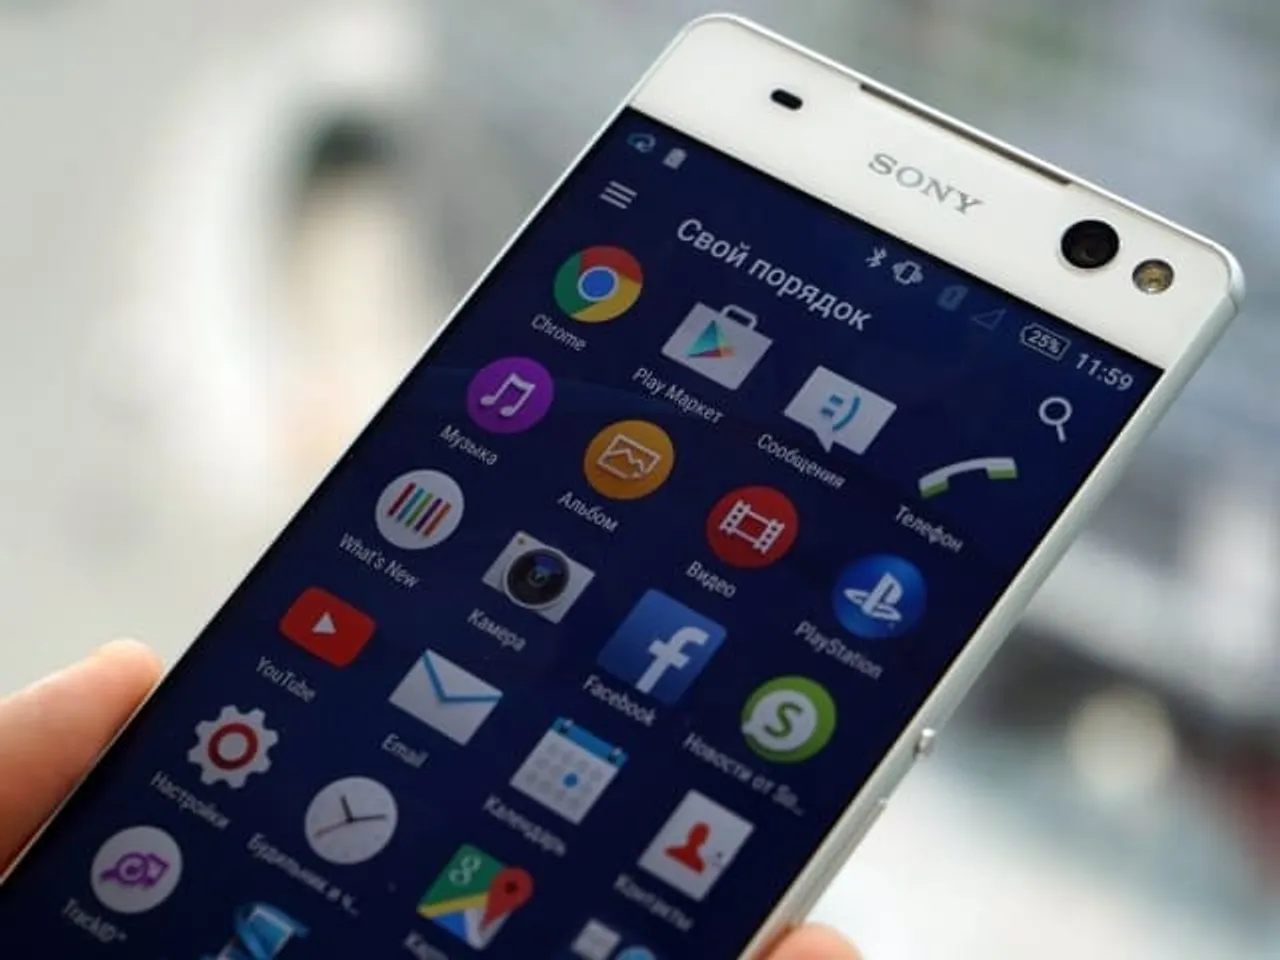 Sony brings Xperia C5 Ultra, priced at Rs 29,990